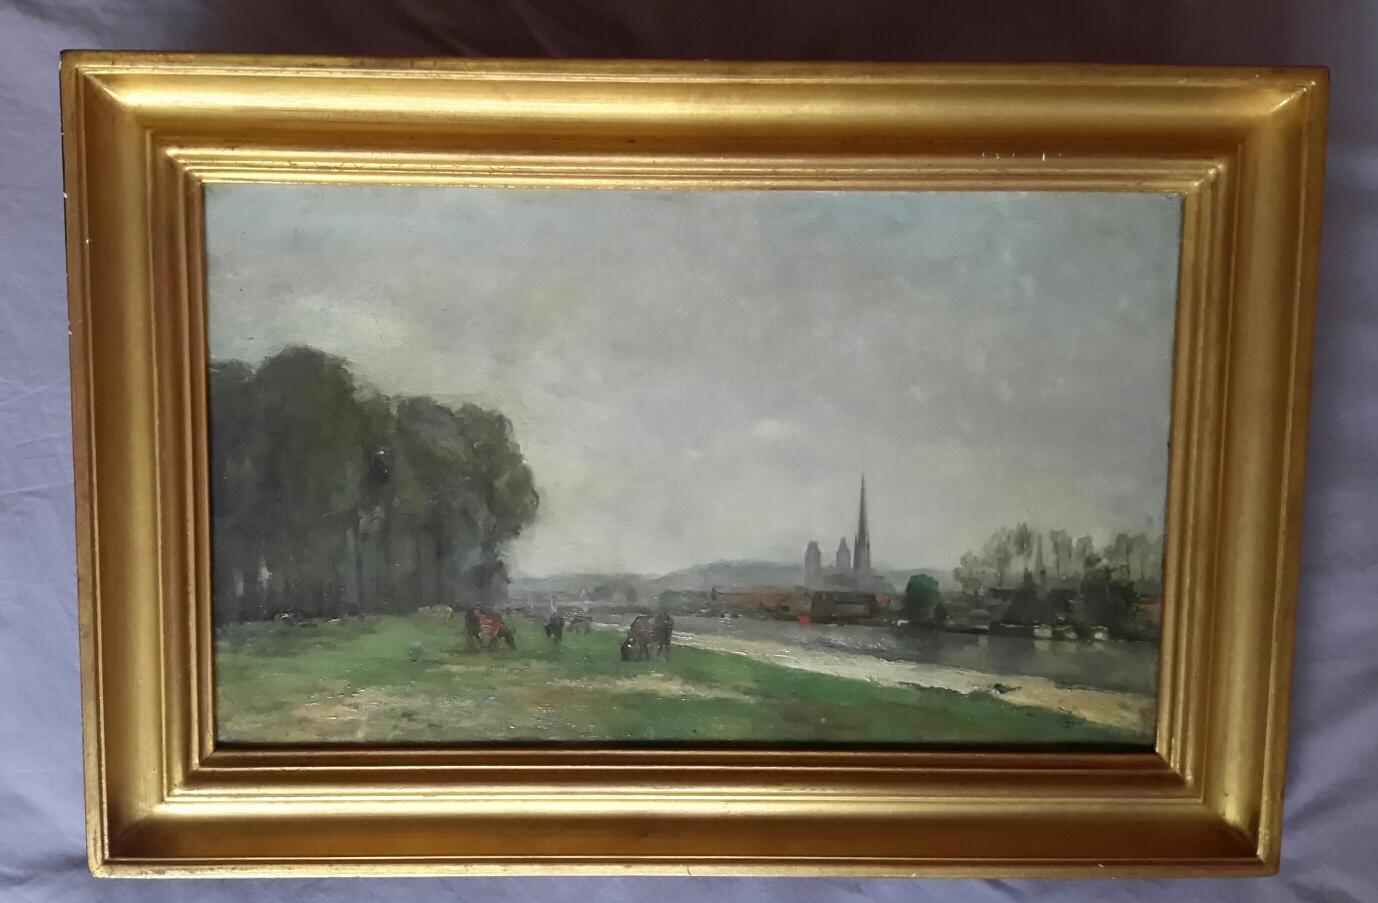  Normandy Rouen Cathedral 19th Century Landscape - Academic Painting by Langlois